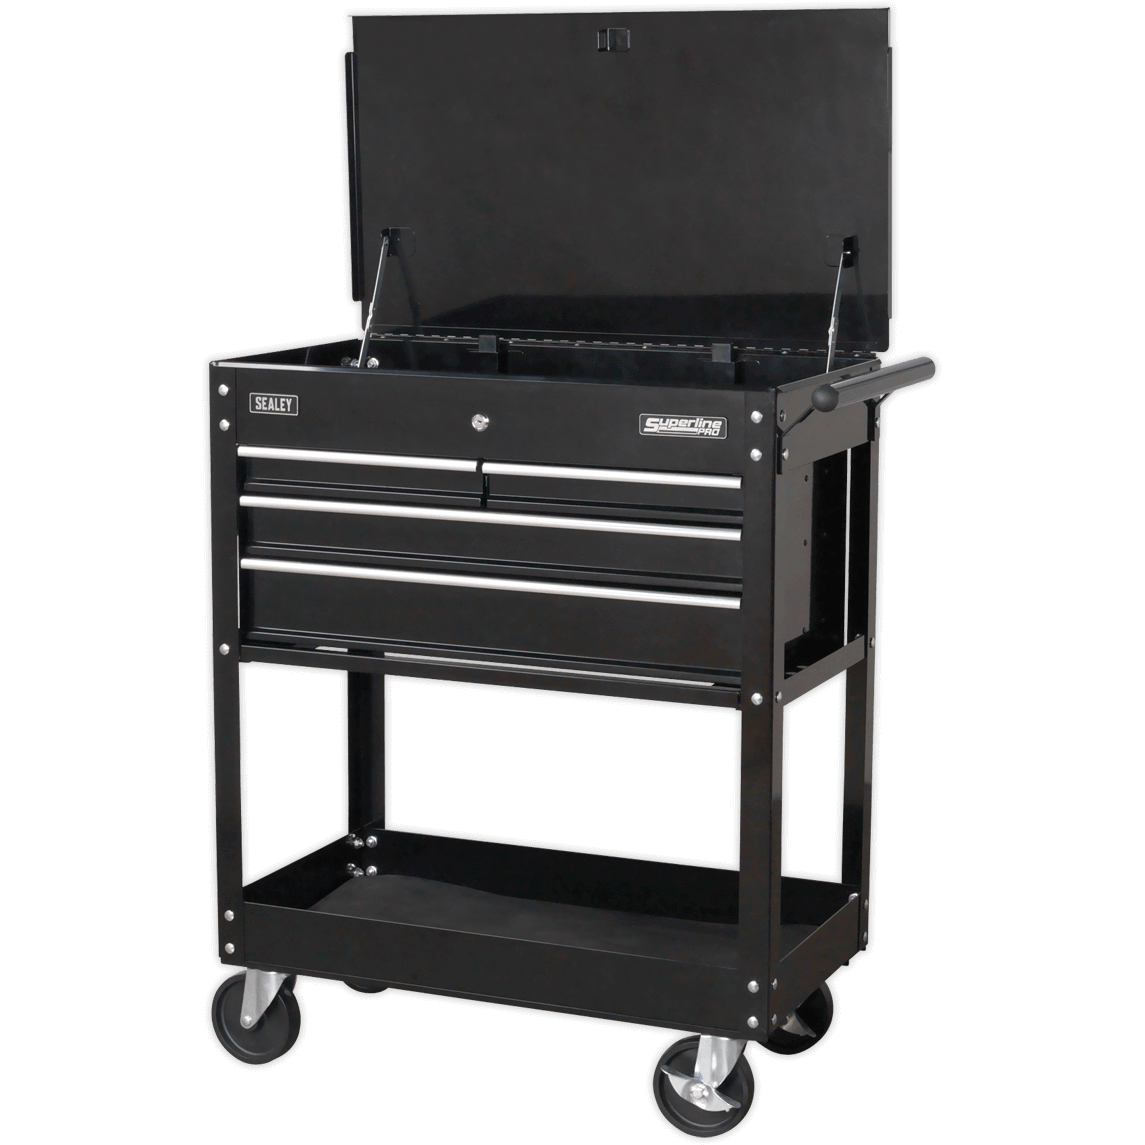 Sealey 4 Drawer Heavy Duty Mobile Tool and Parts Trolley Black